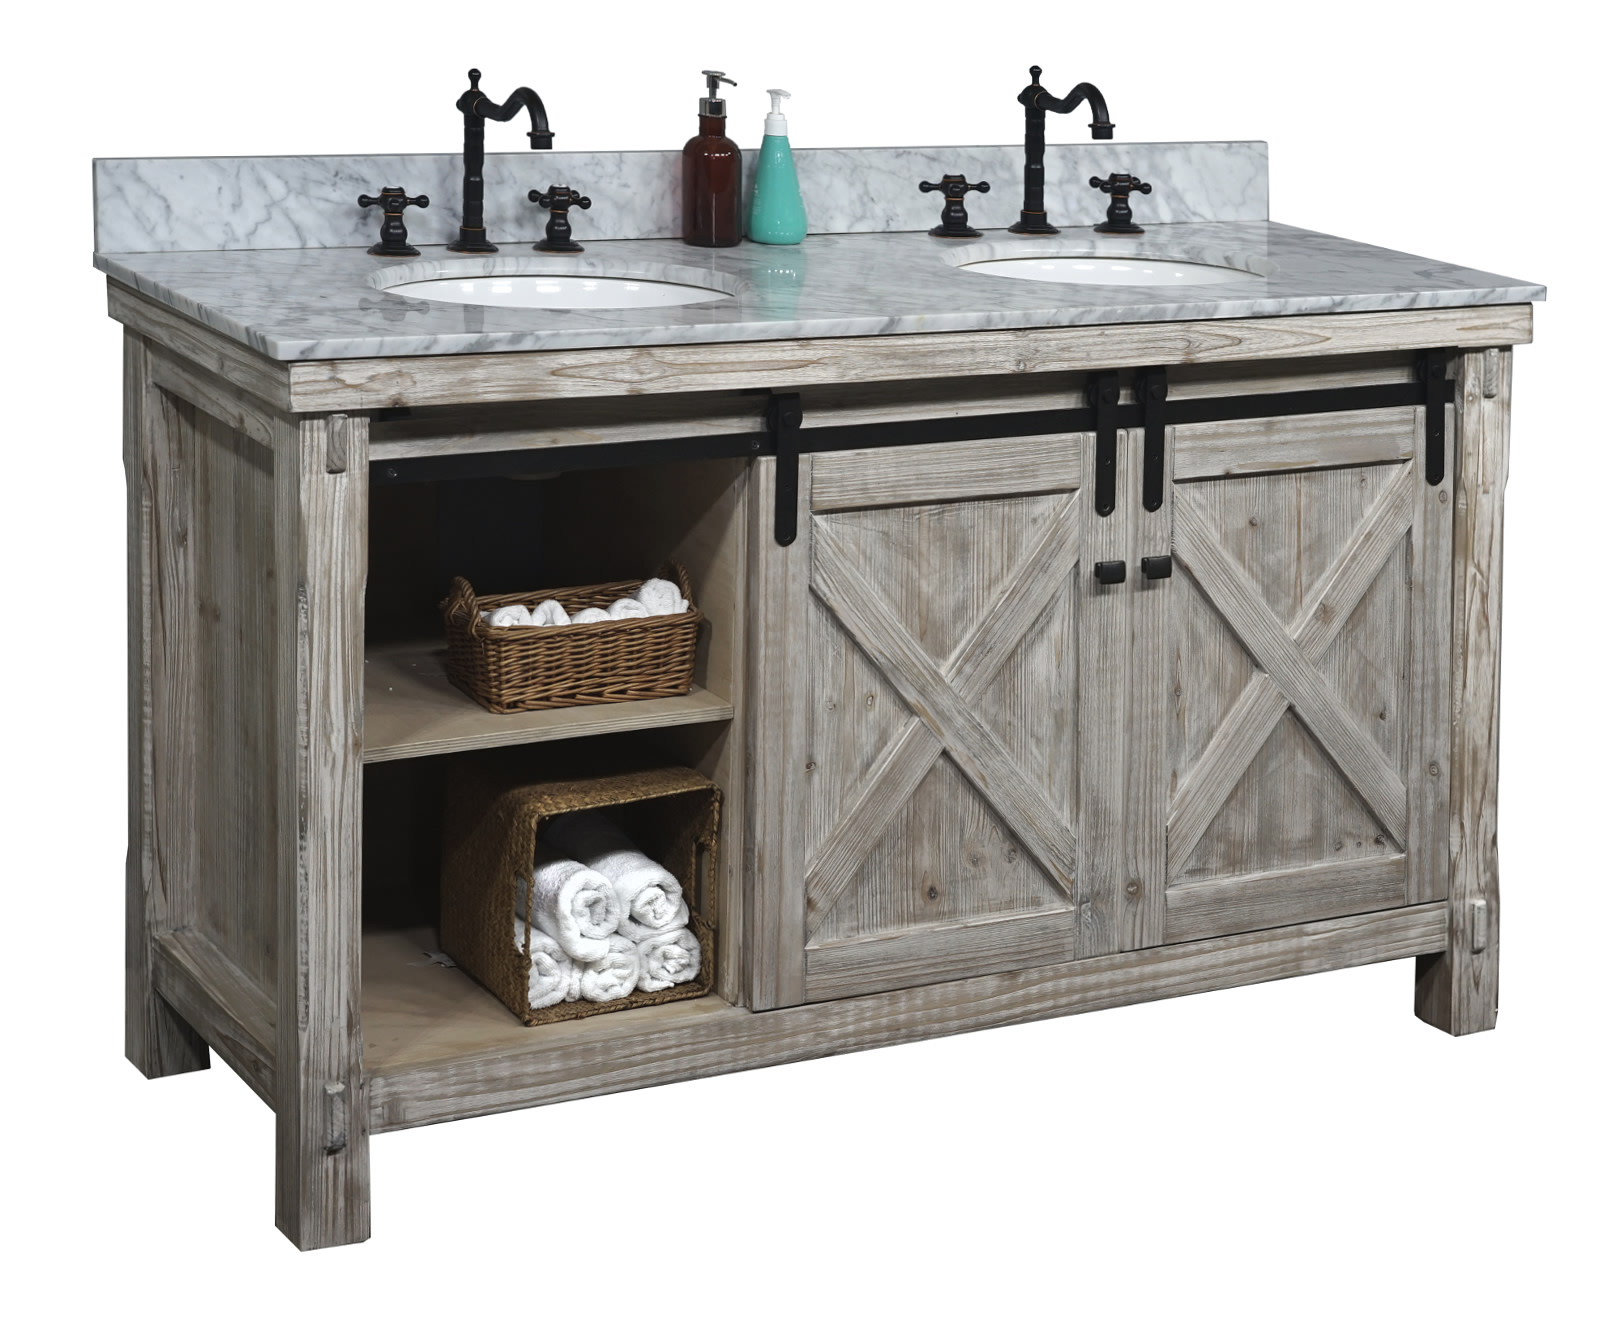 Rustic Country Bathroom VANITY BARN DOORS for Double Vessel Sink Remodeling  Farmhouse Cabinet Storage Shelf Slab Washstand Perfect Gift 